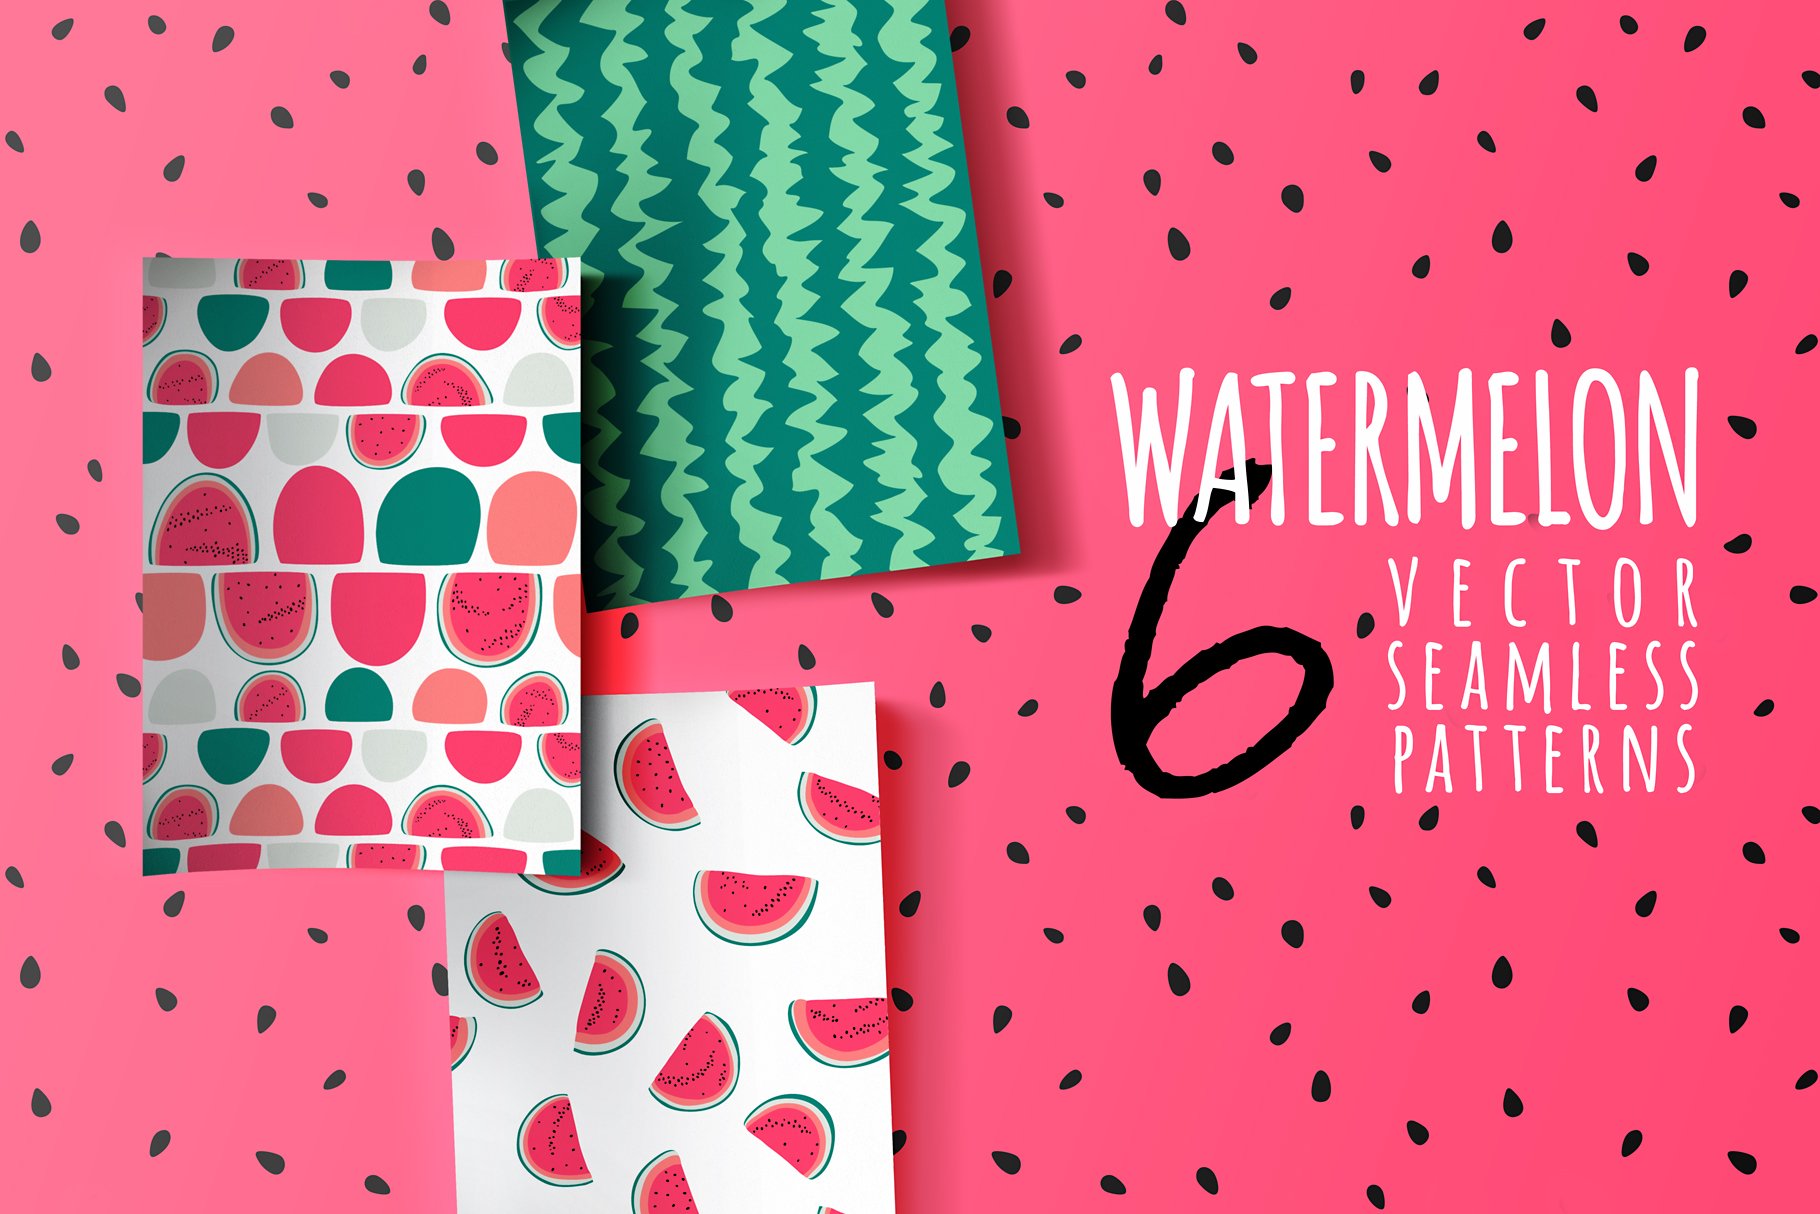 Watermelon vector seamless patterns cover image.